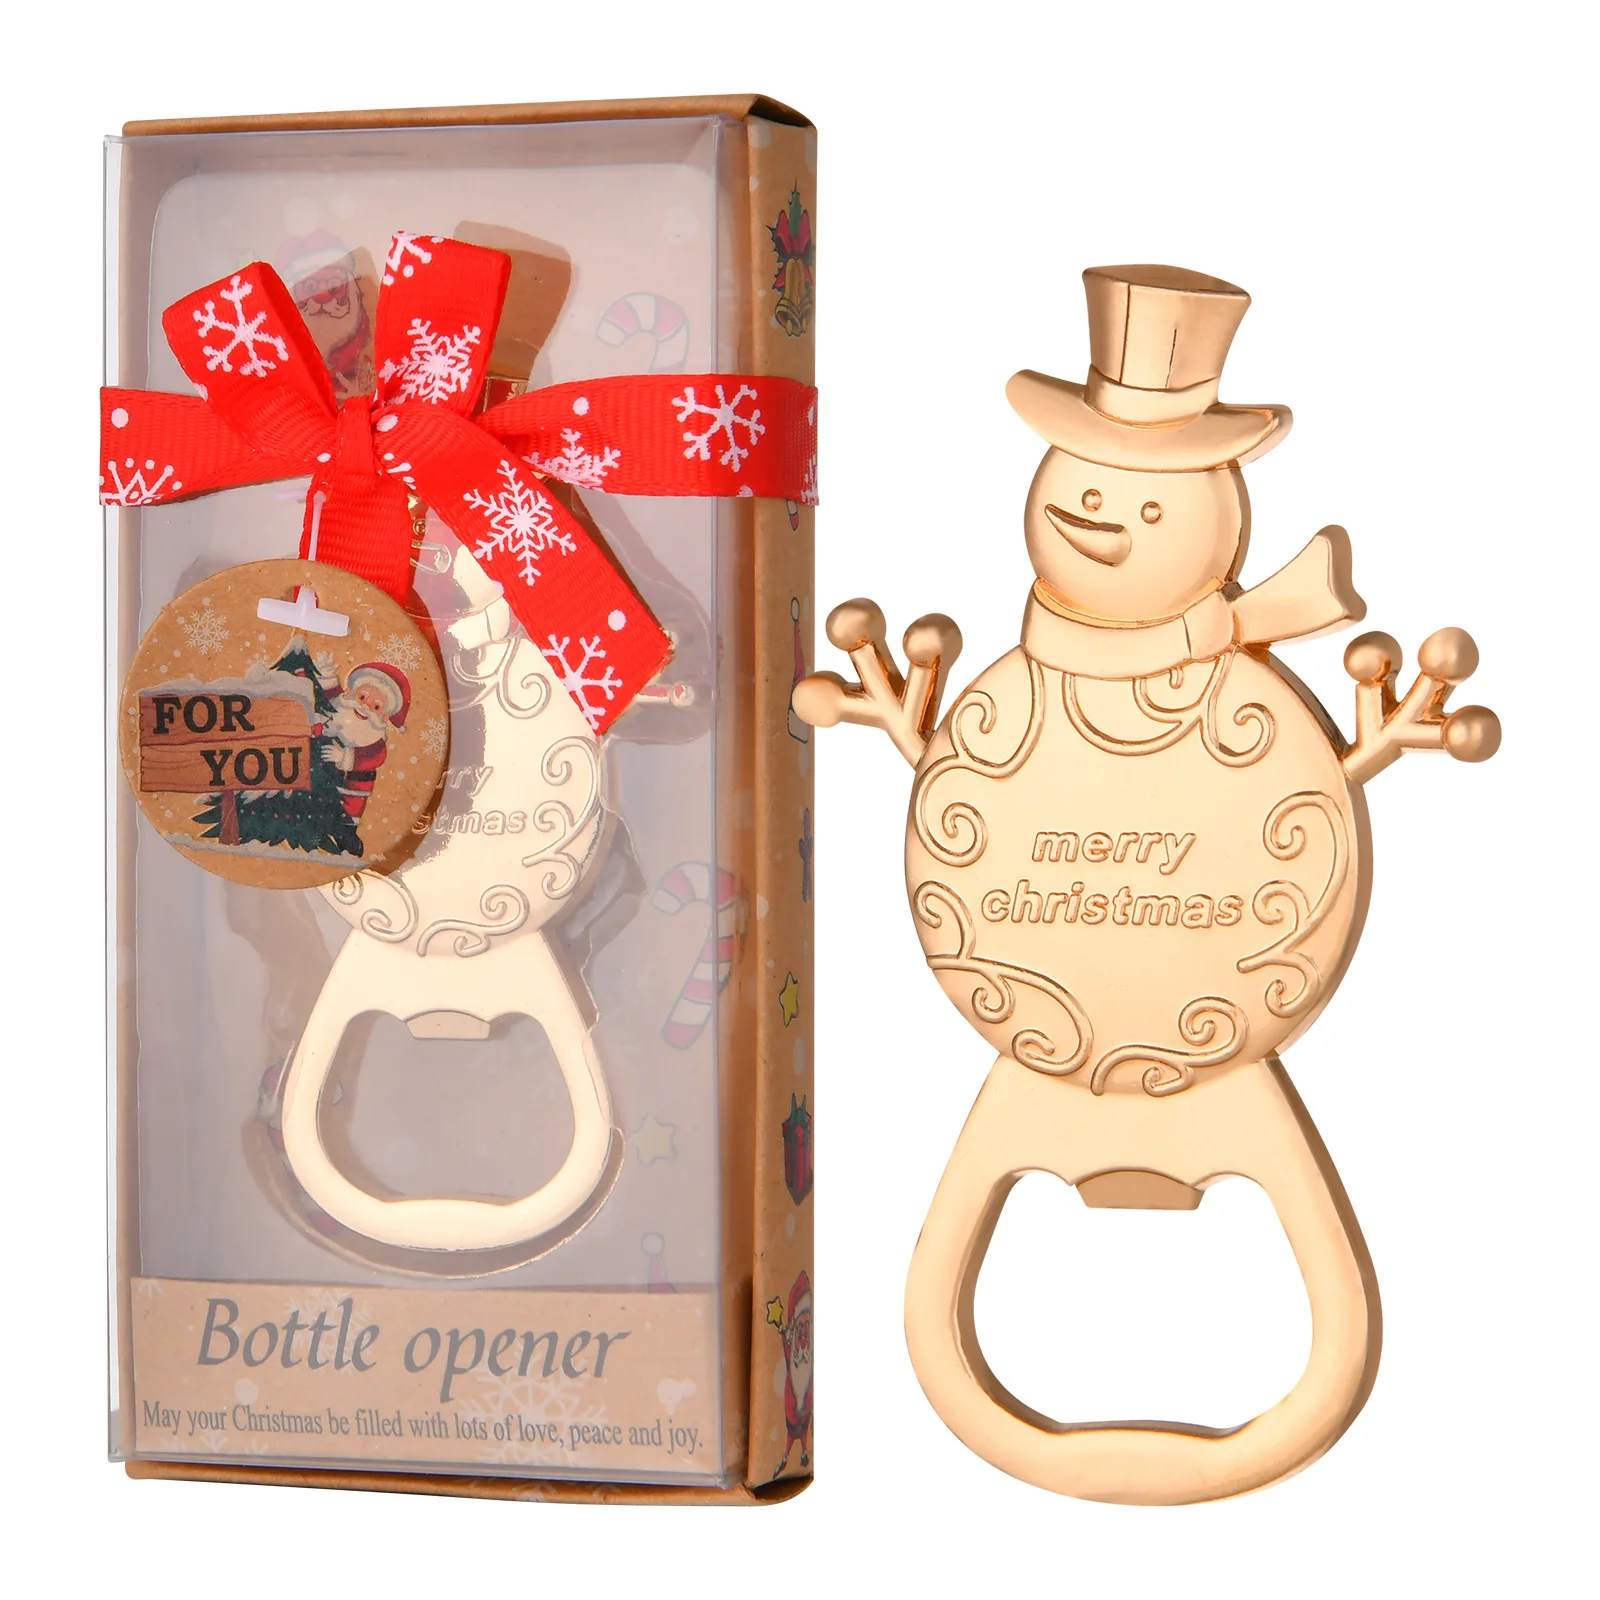 

New Style Christmas Snowman Shaped Bottle Opener Souvenir Gift For Baby Shower Favors Gifts